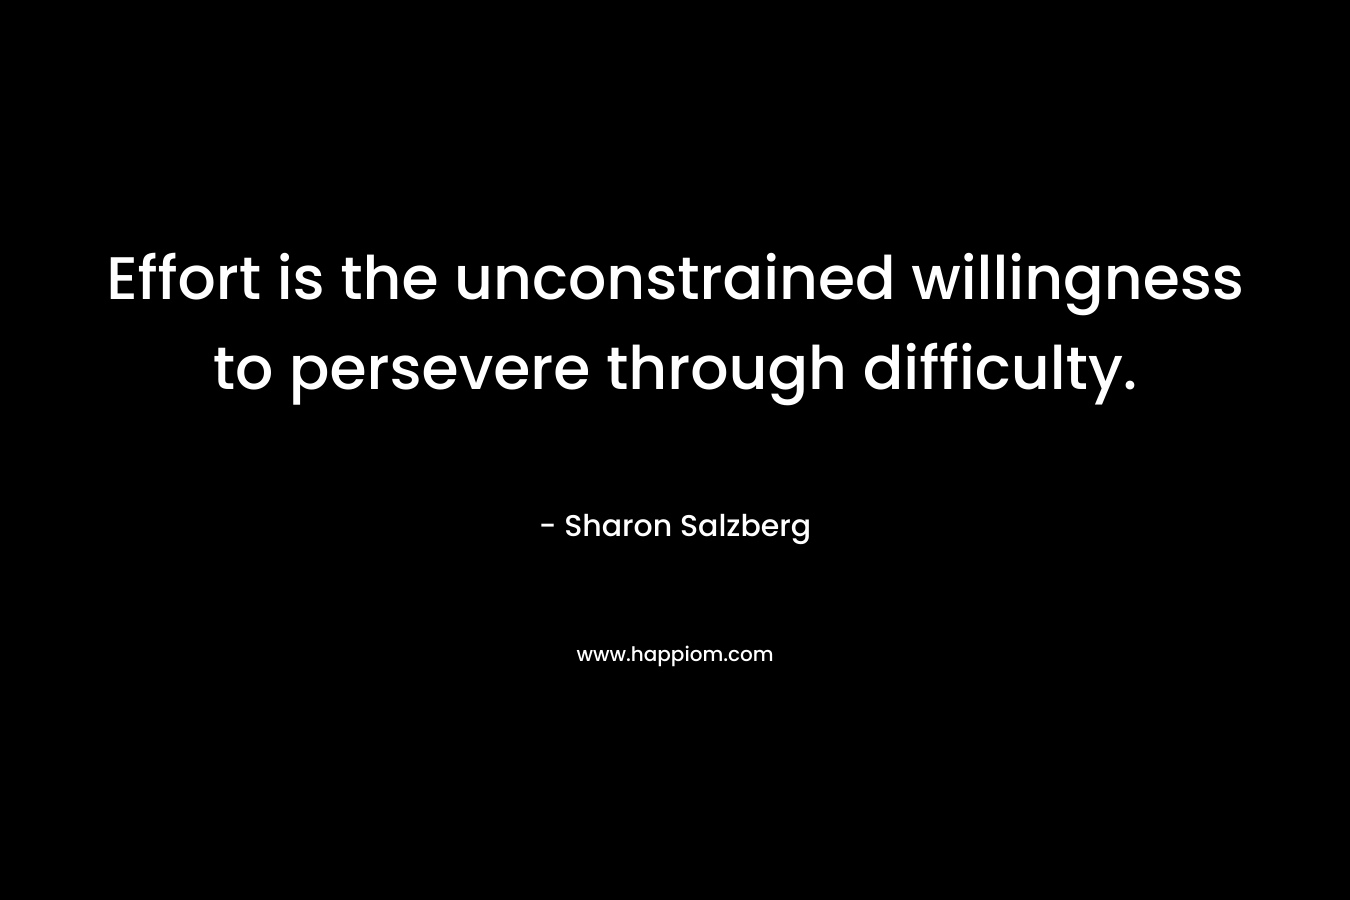 Effort is the unconstrained willingness to persevere through difficulty.